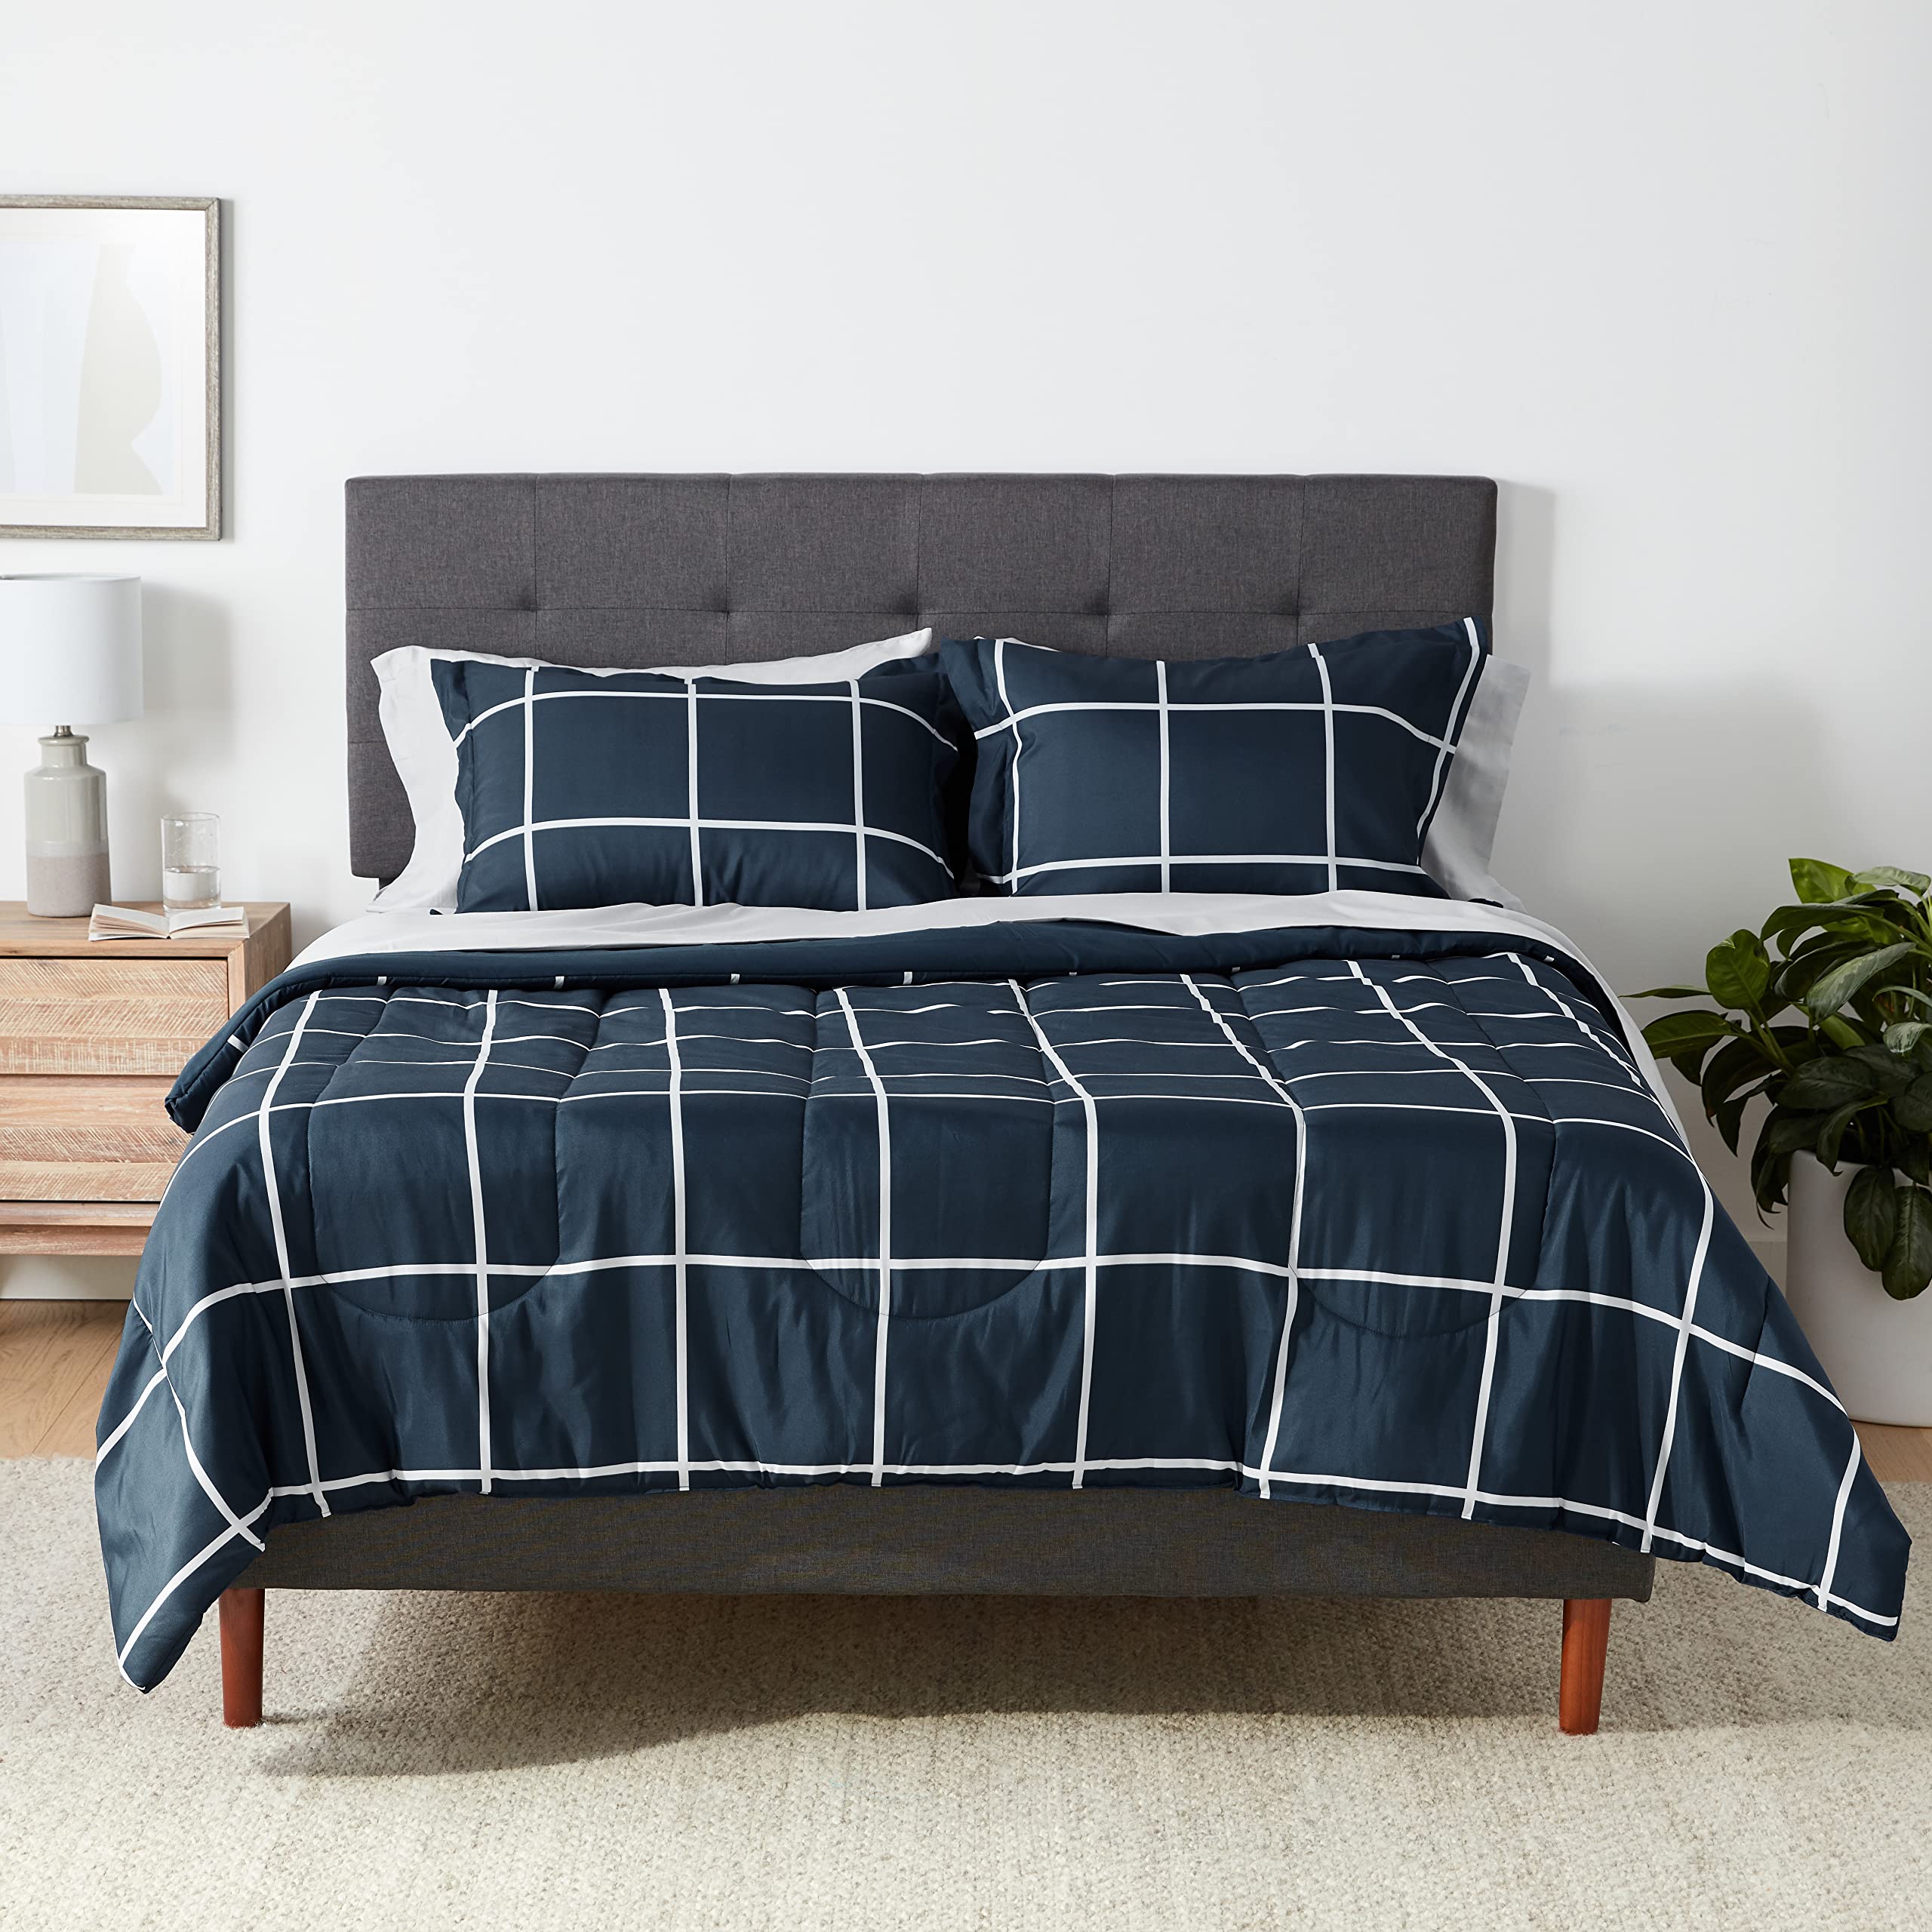 7-Piece Amazon Basics Lightweight Microfiber Bed-in-a-Bag Comforter Bedding Set (Full/Queen, Navy Plaid) $26.85 + Free Shipping w/ Prime or on $35+